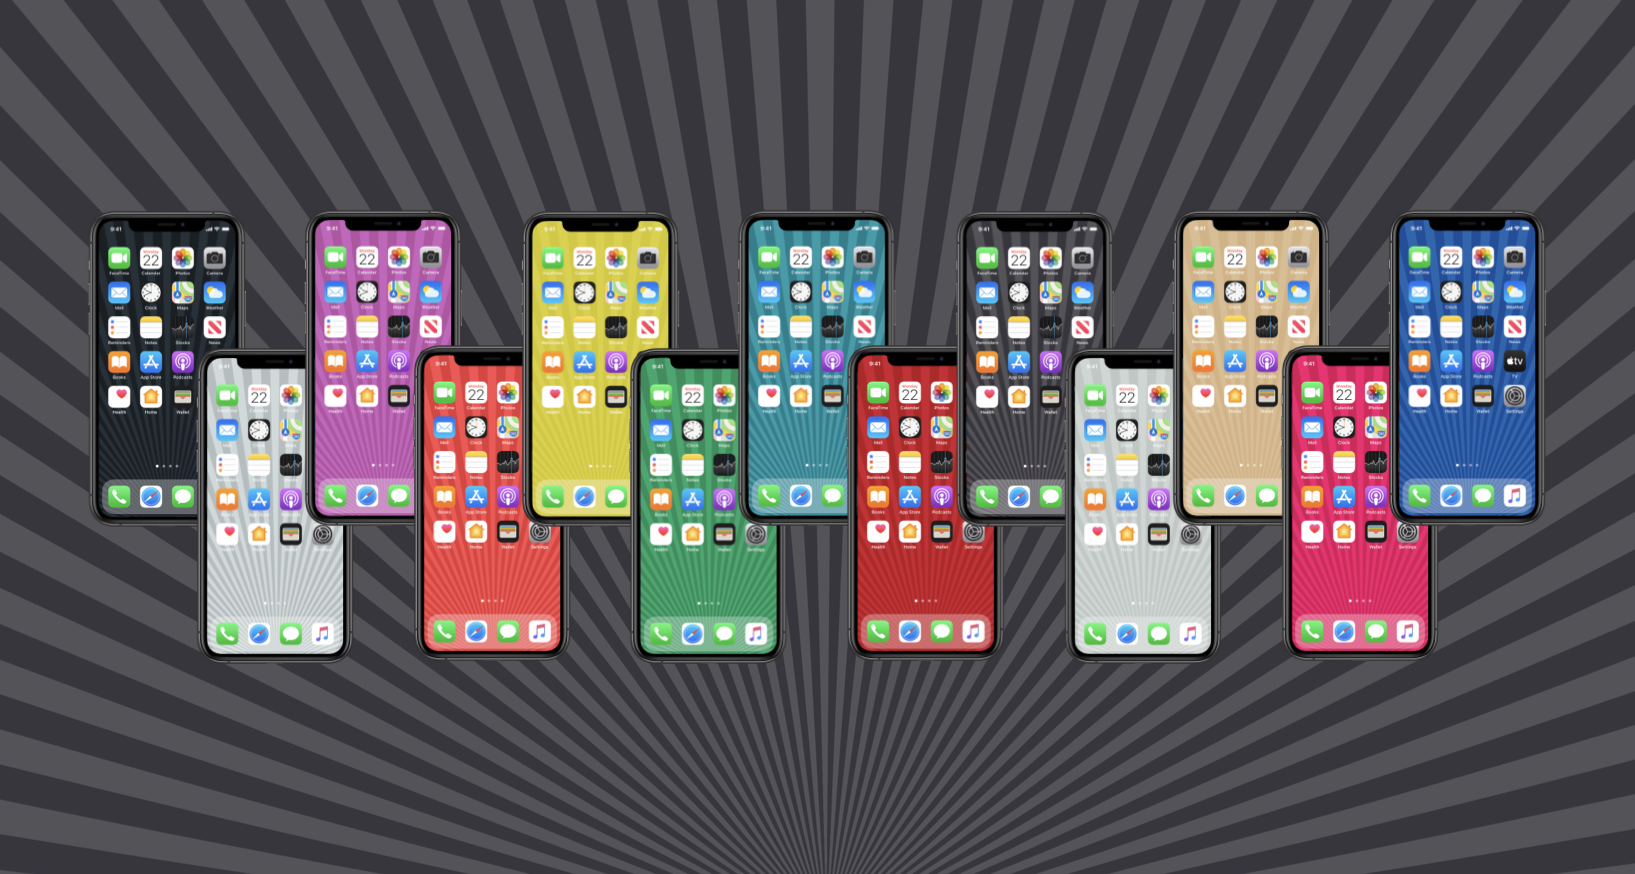 Check Out These Beautiful Iphone Wallpapers Inspired By The 7th Generation Ipod Nano 9to5mac